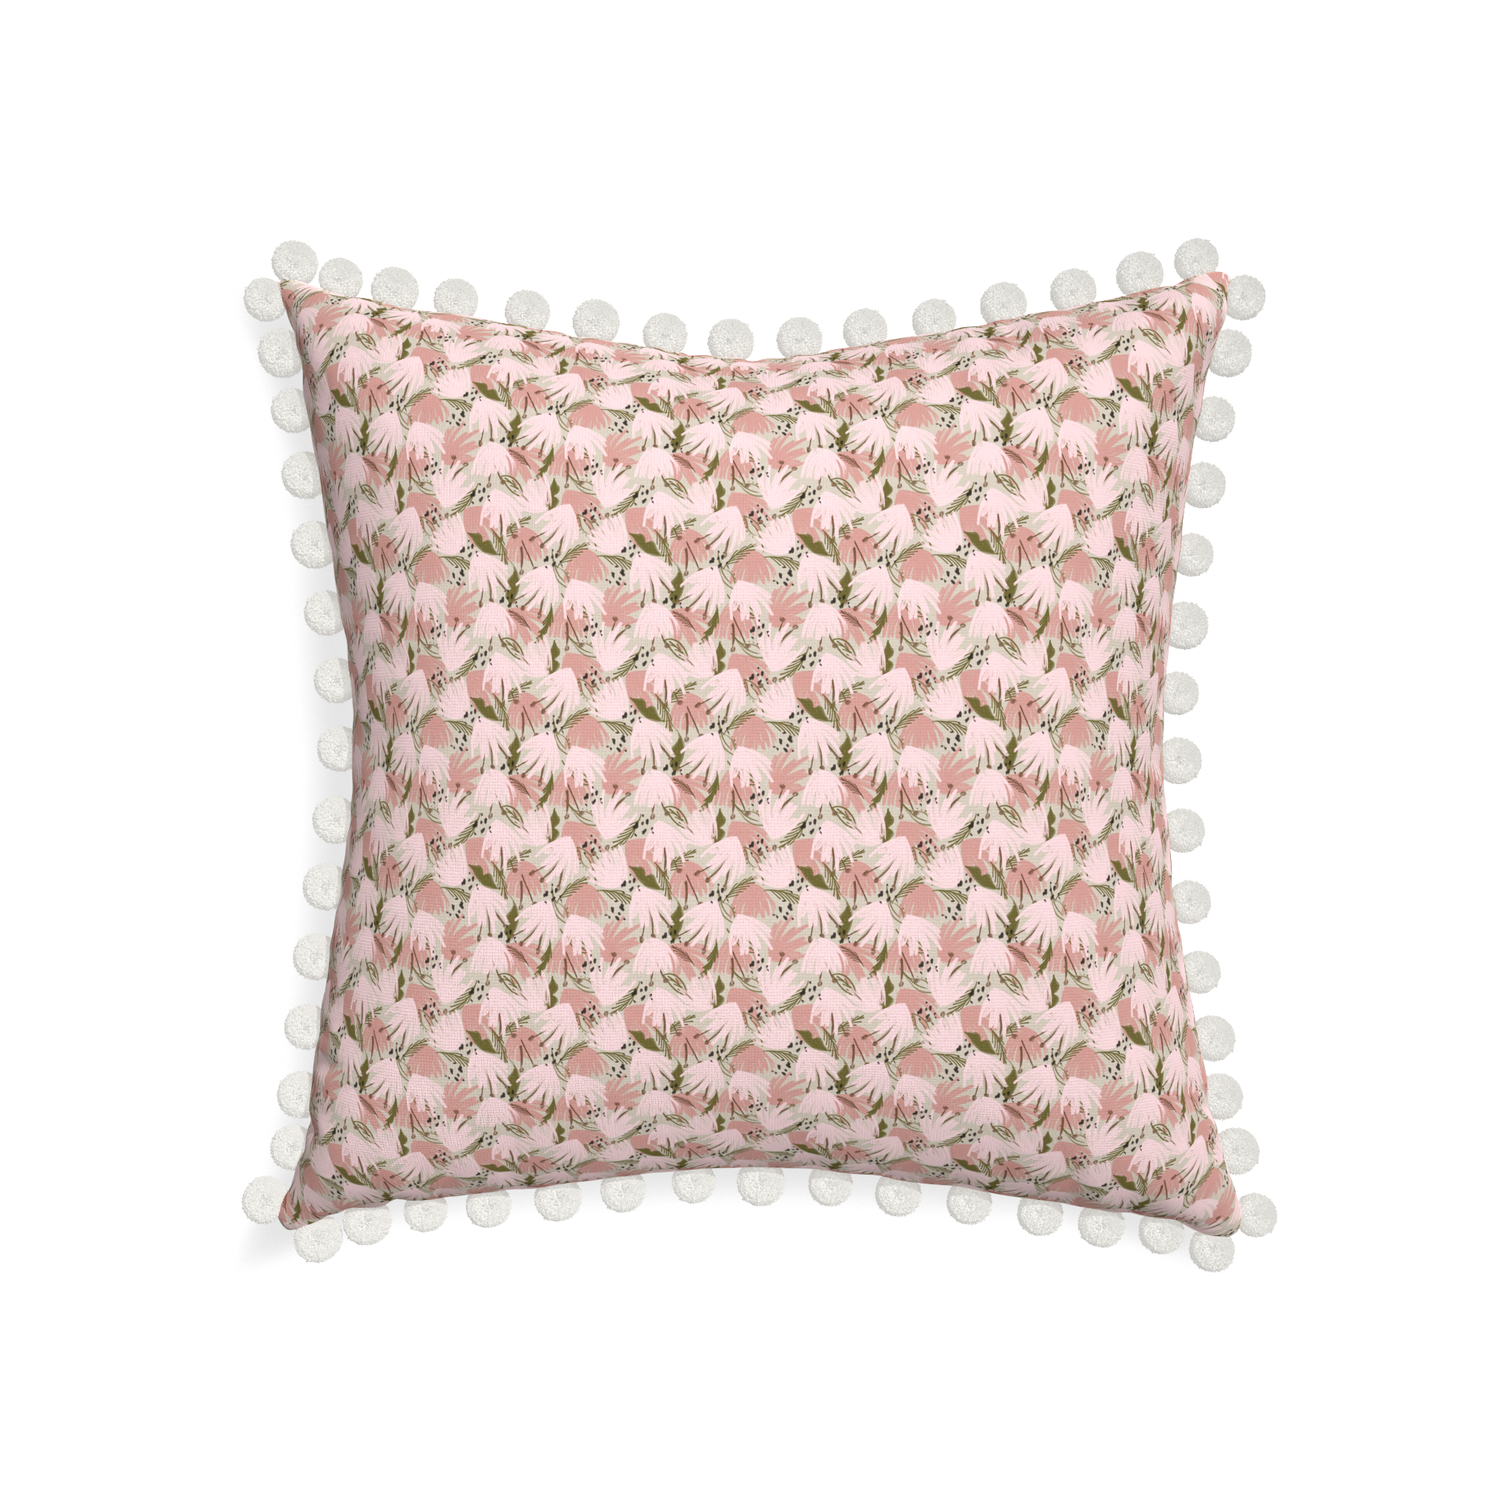 22-square eden pink custom pink floralpillow with snow pom pom on white background